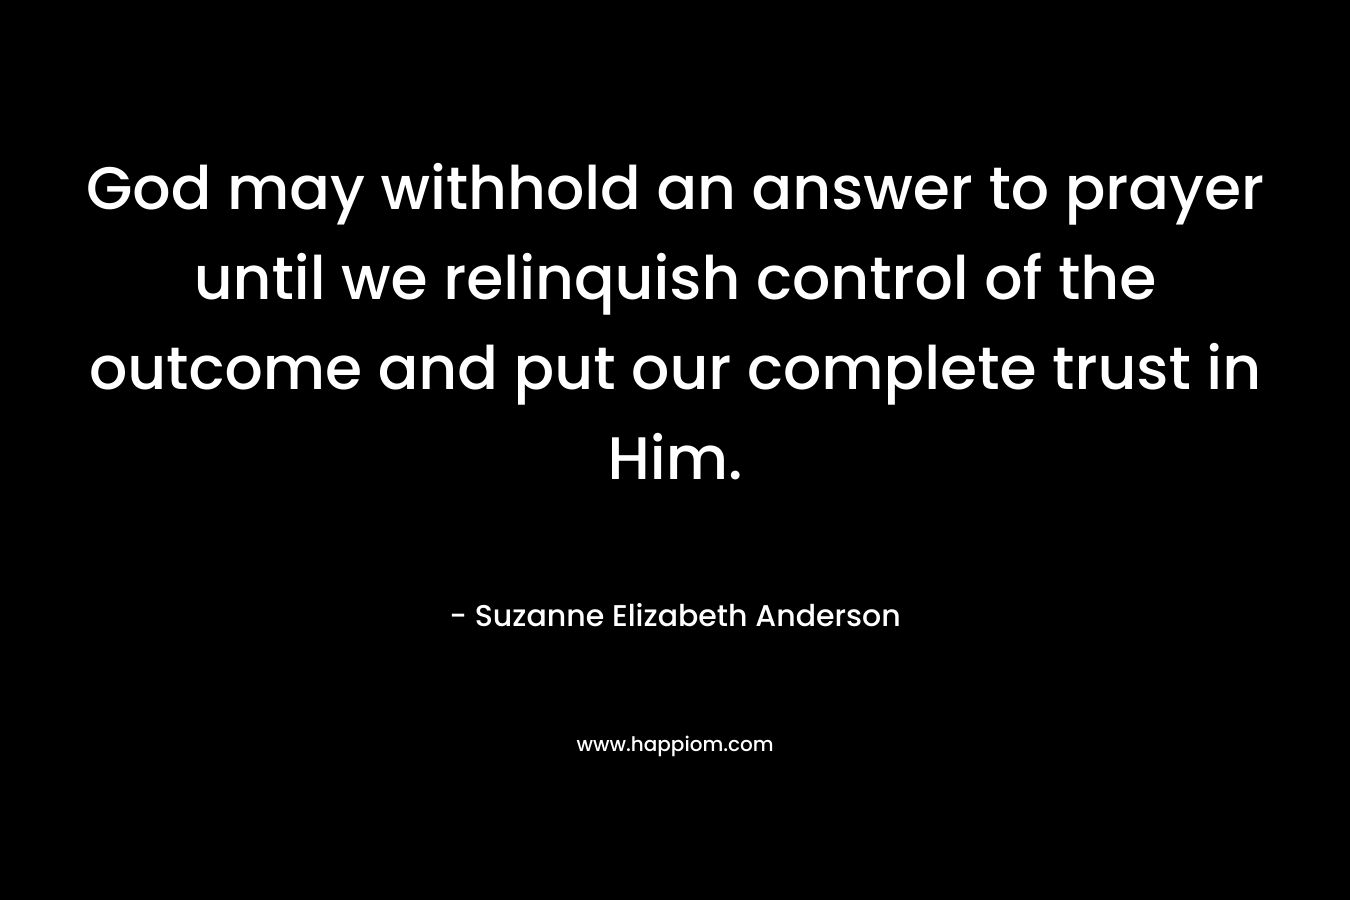 God may withhold an answer to prayer until we relinquish control of the outcome and put our complete trust in Him.